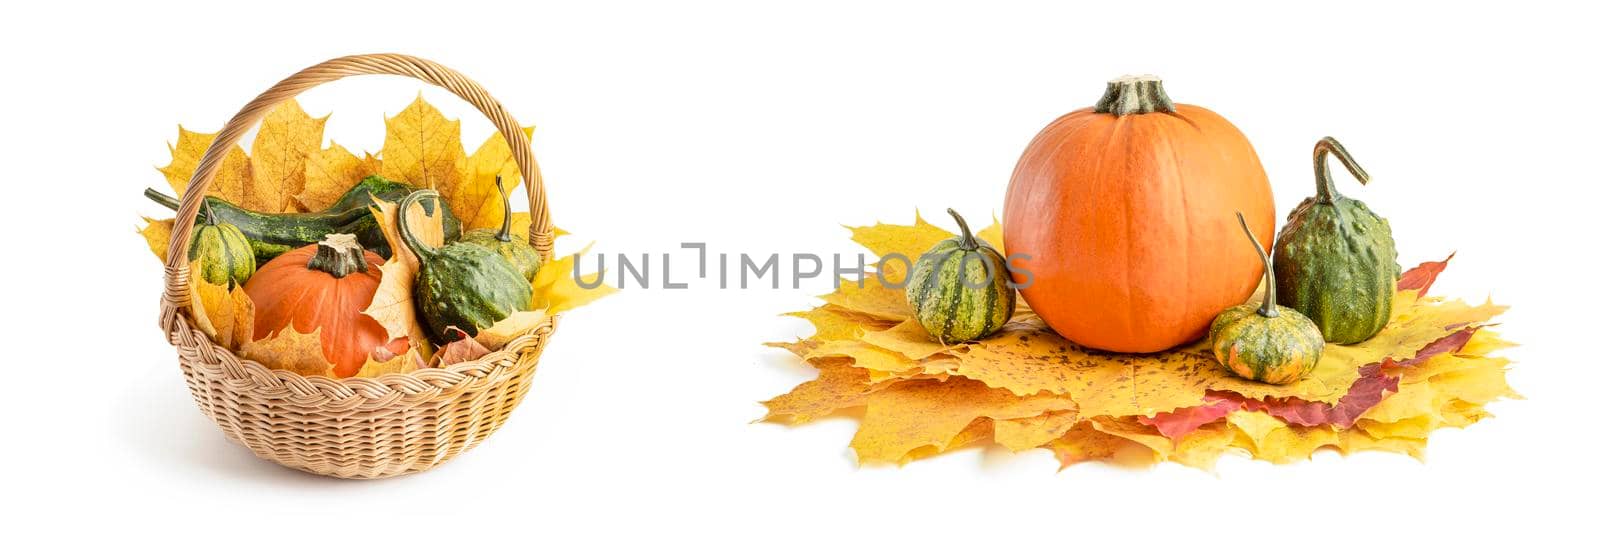 A large set of small pumpkins and pumpkin in a wicker basket, for Halloween decoration. Isolate on white background. Autumn set of decorative pumpkins and maple leaves. by SERSOL